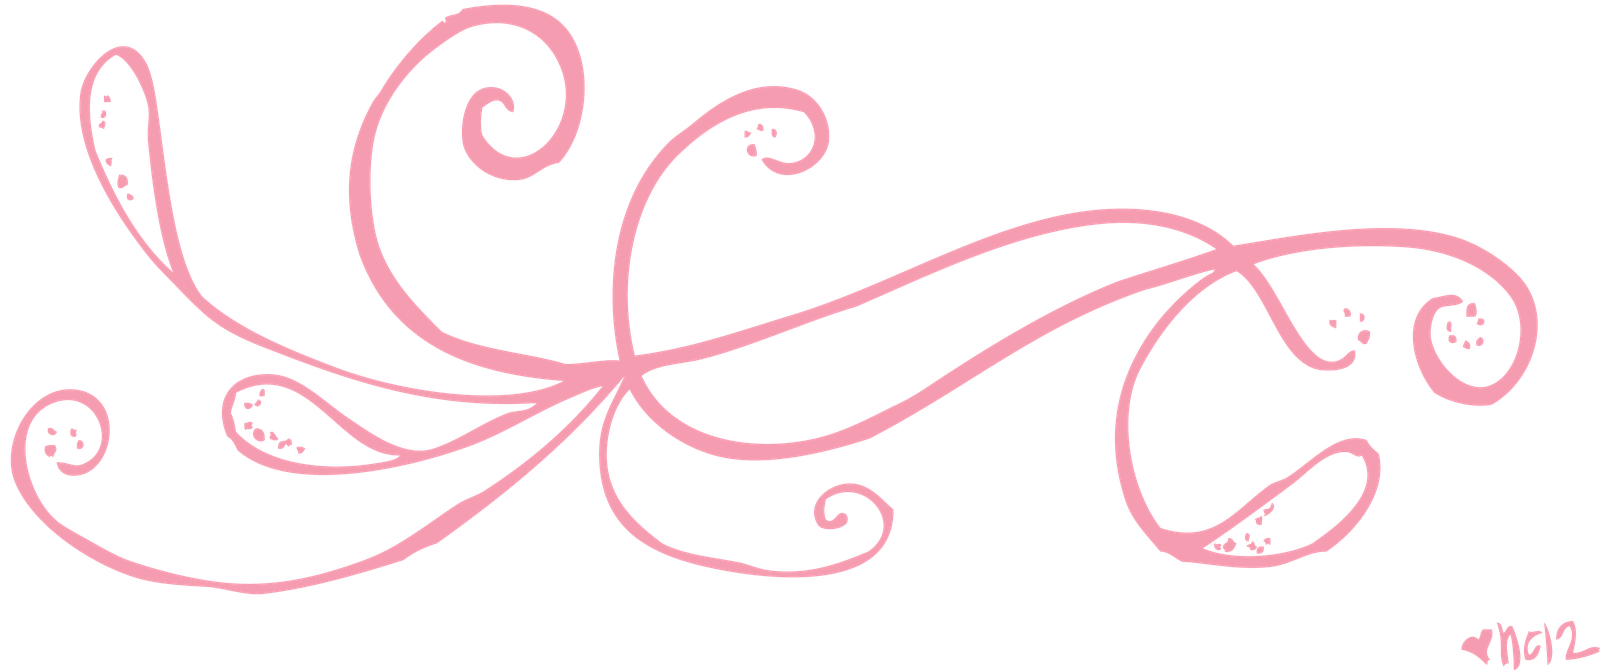 Woman Symbol Pink Background Free Clipart Cc.